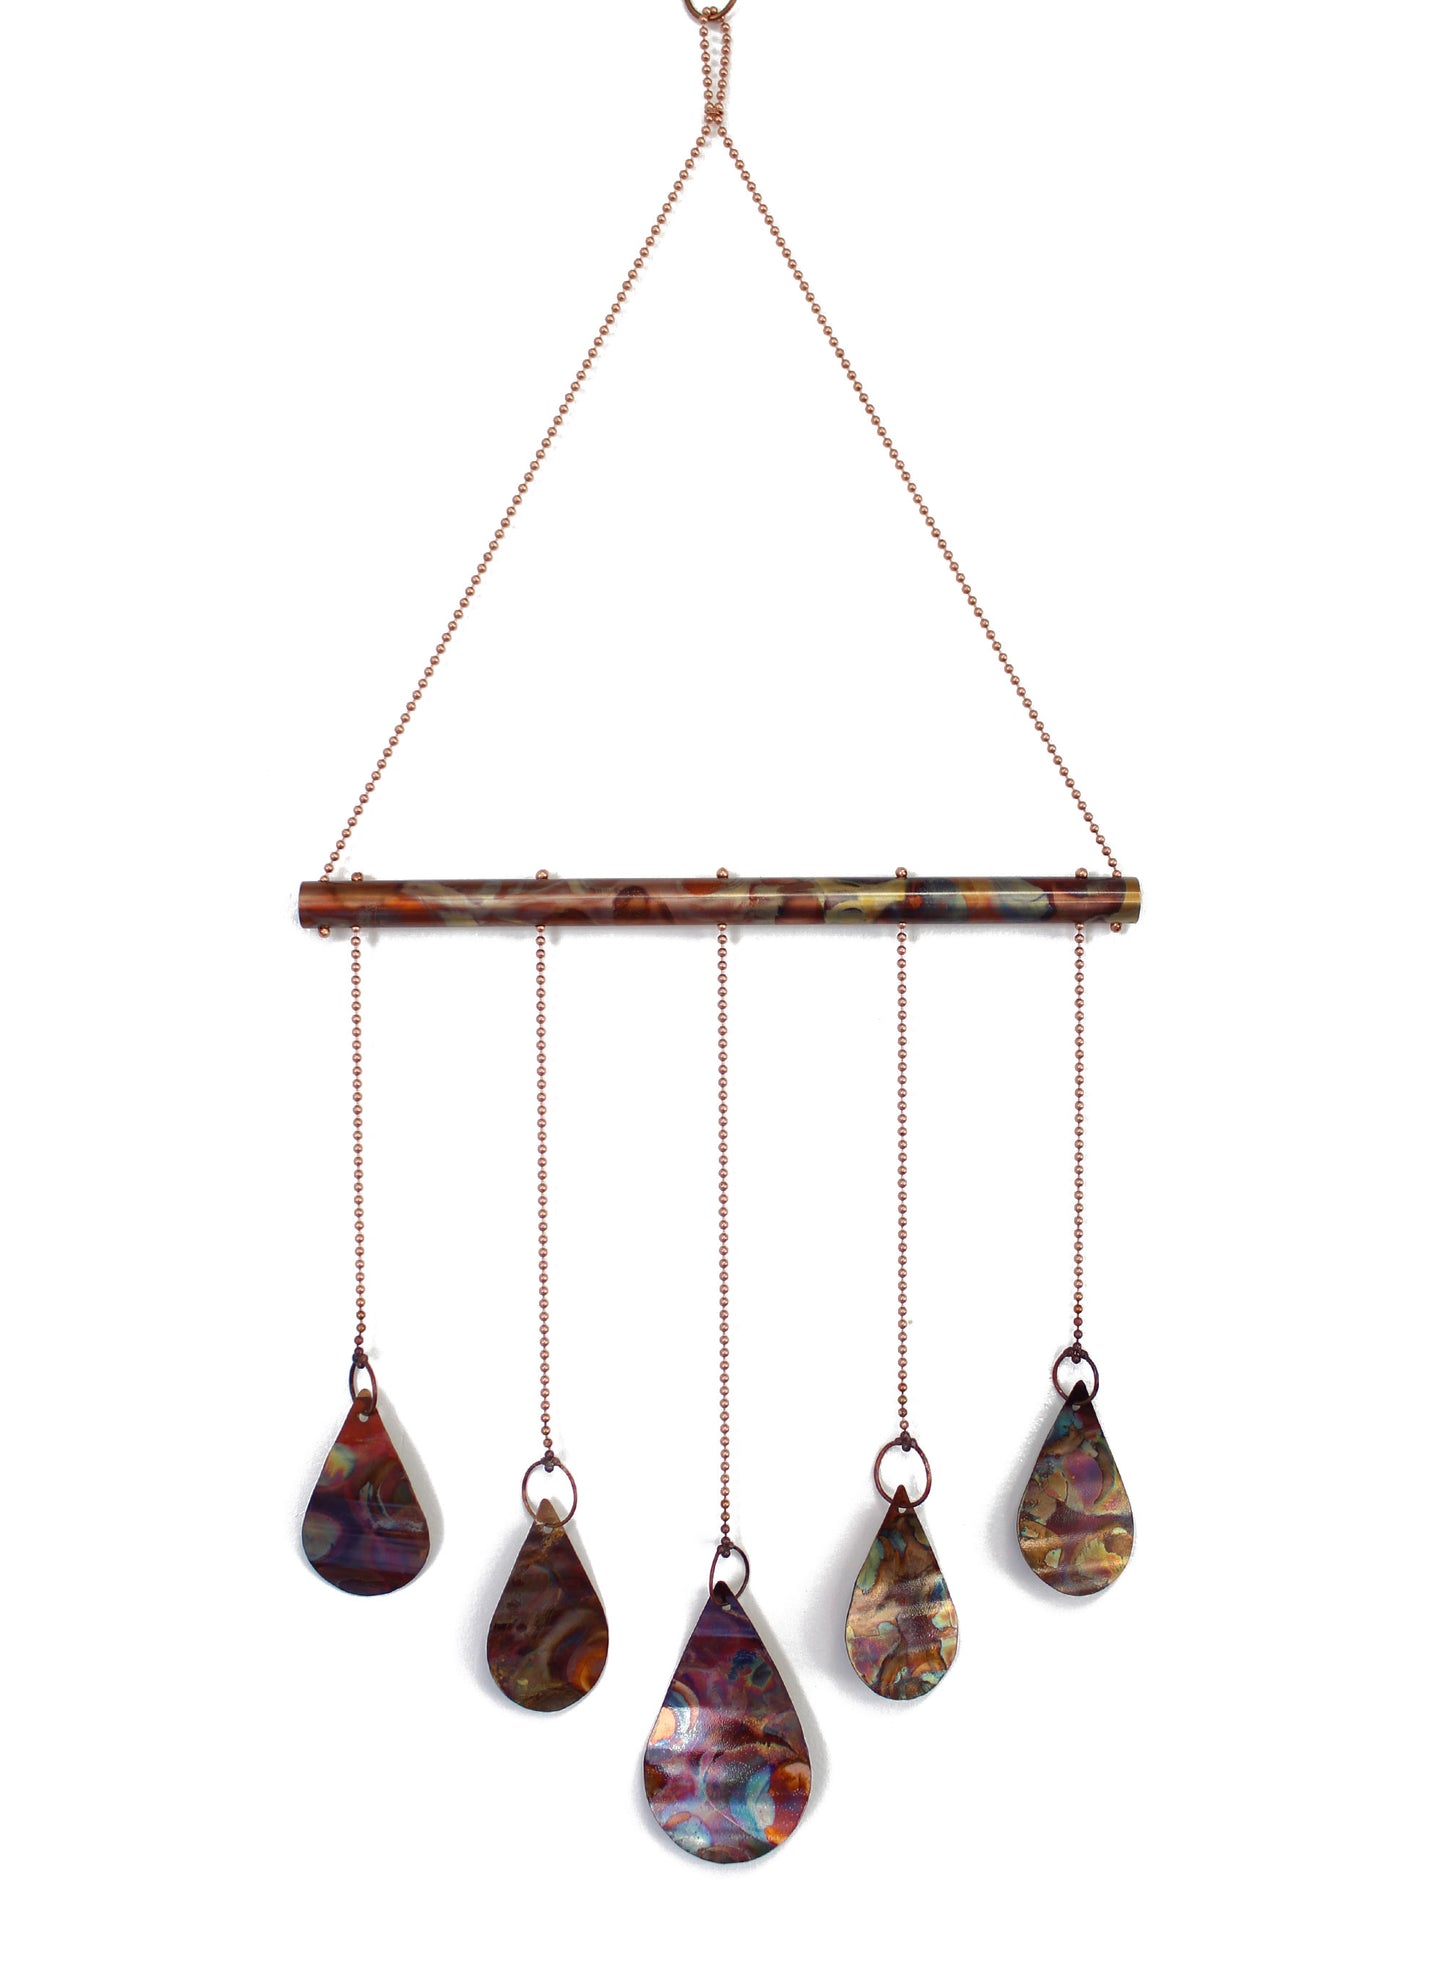 Flame Painted Copper Teardrop Wind Chime / Mobile